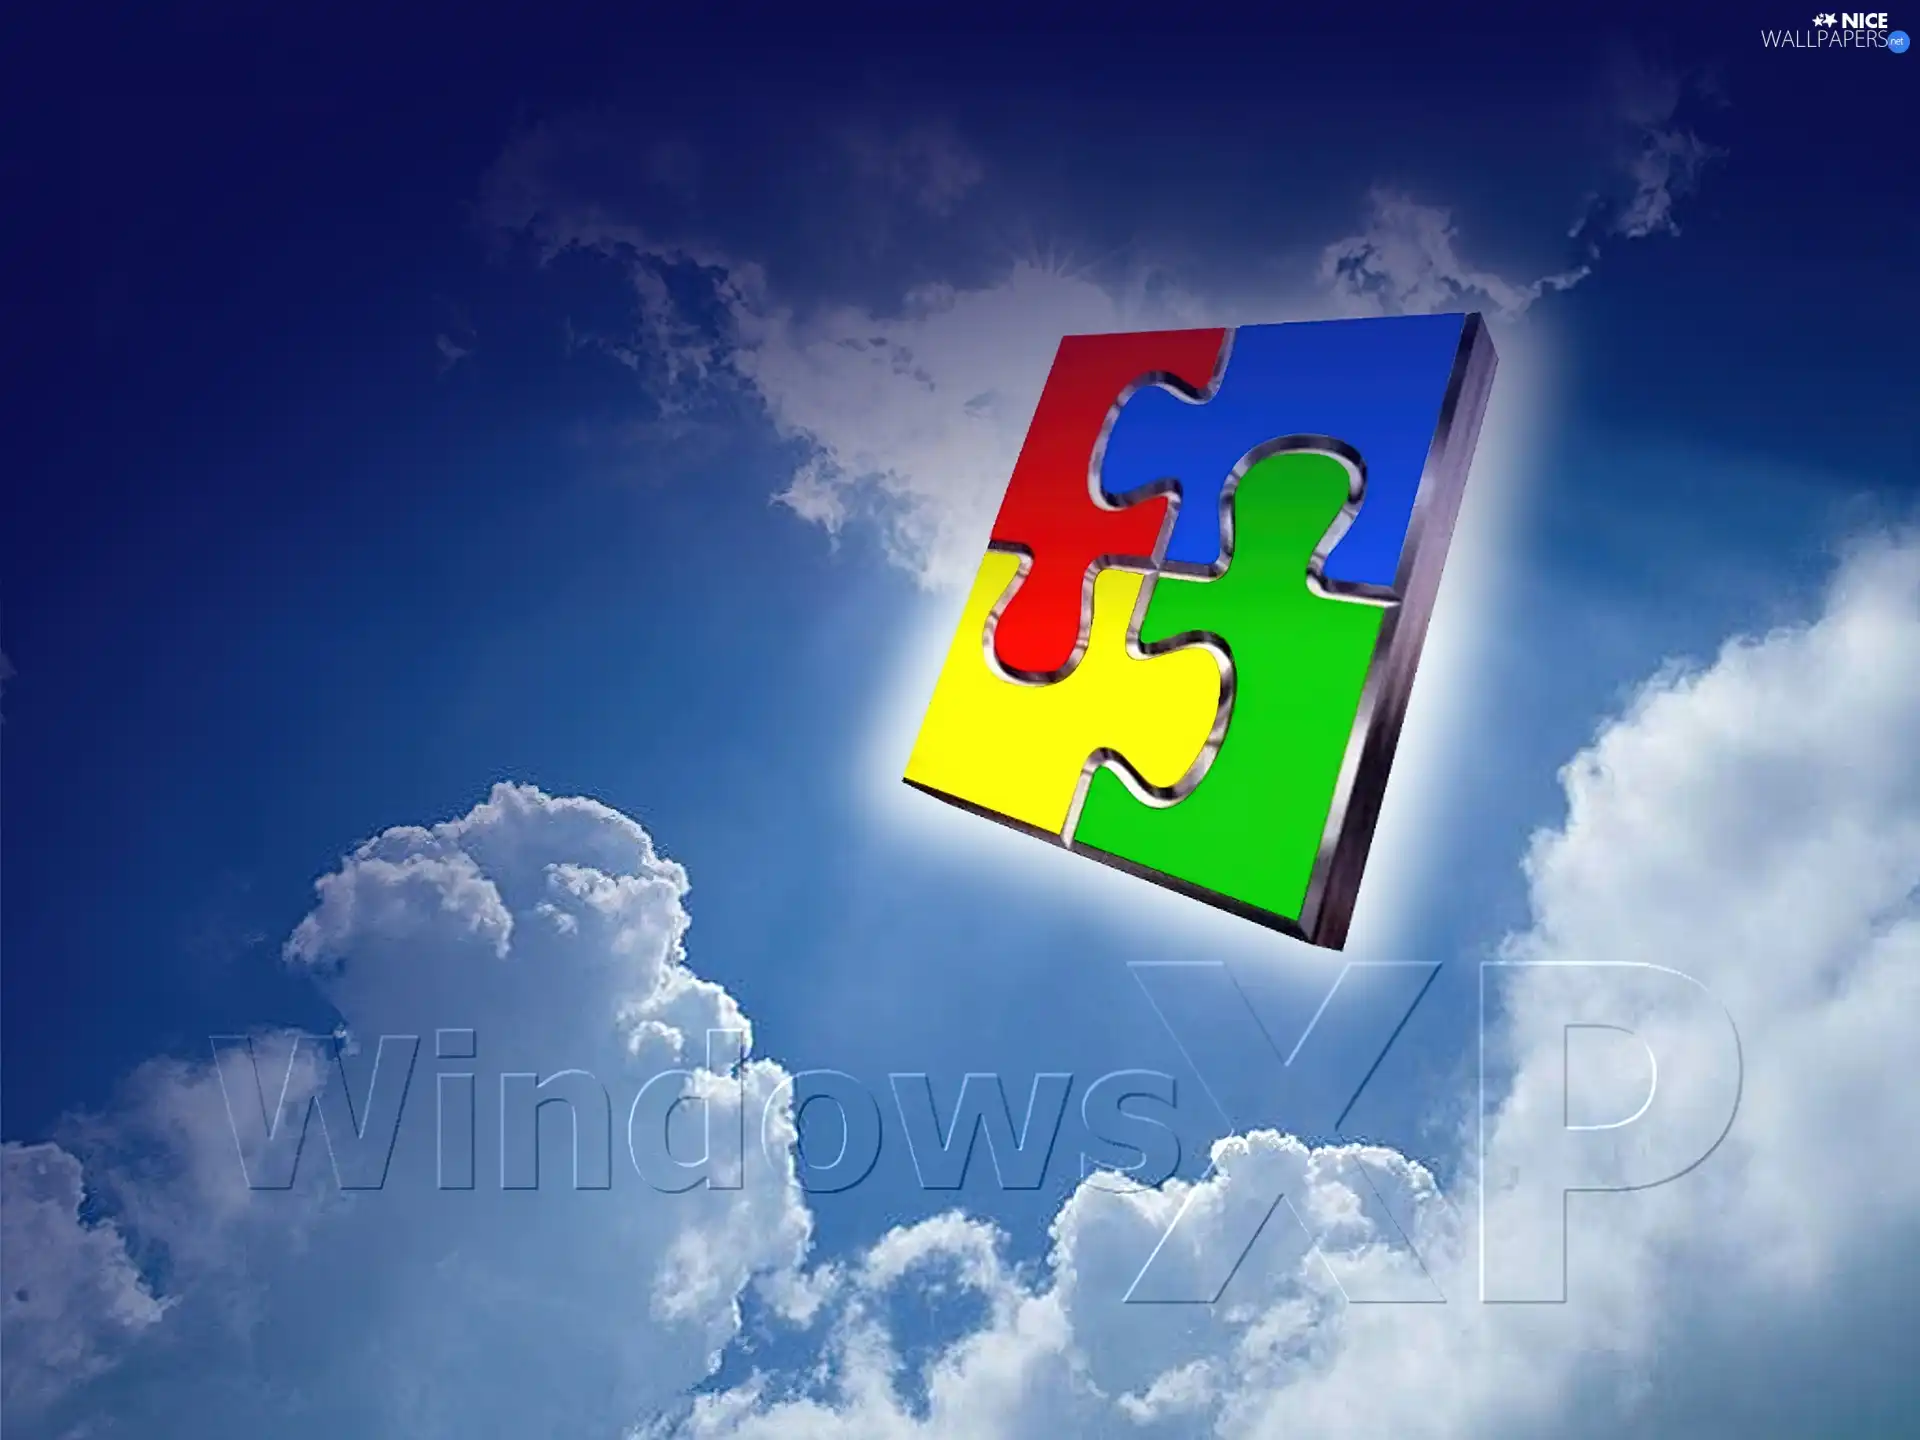 windows, system, puzzle, clouds, XP, operating